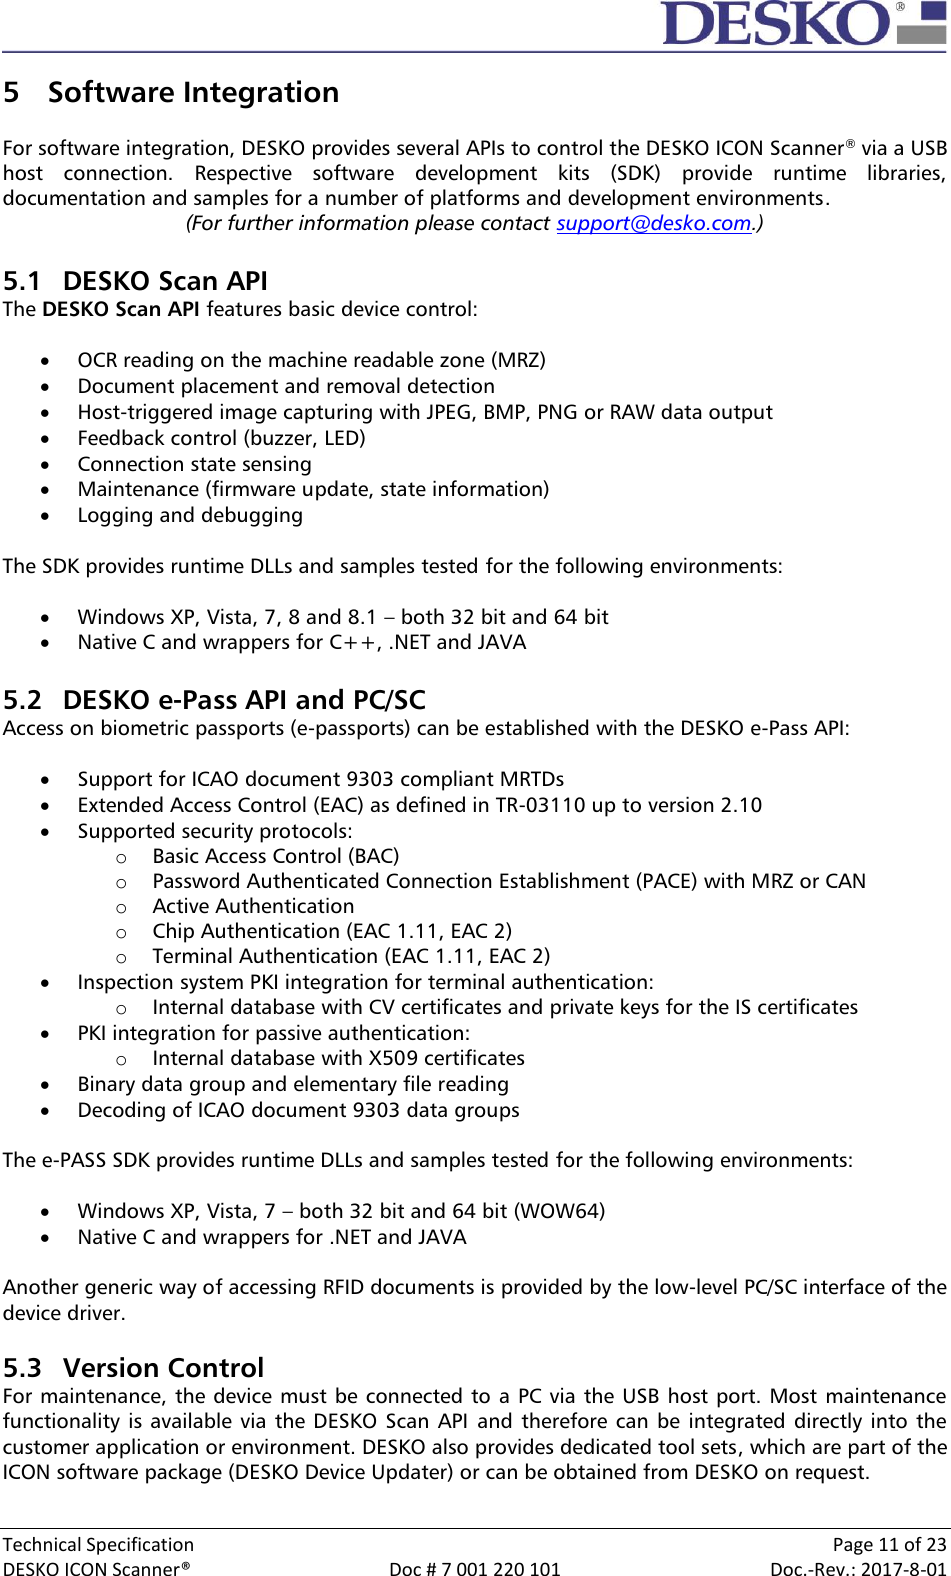  Technical Specification    Page 11 of 23 DESKO ICON Scanner®  Doc # 7 001 220 101  Doc.-Rev.: 2017-8-01  5 Software Integration  For software integration, DESKO provides several APIs to control the DESKO ICON Scanner® via a USB host  connection.  Respective  software  development  kits  (SDK)  provide  runtime  libraries, documentation and samples for a number of platforms and development environments. (For further information please contact support@desko.com.)  5.1 DESKO Scan API The DESKO Scan API features basic device control:   OCR reading on the machine readable zone (MRZ)  Document placement and removal detection  Host-triggered image capturing with JPEG, BMP, PNG or RAW data output  Feedback control (buzzer, LED)  Connection state sensing  Maintenance (firmware update, state information)  Logging and debugging  The SDK provides runtime DLLs and samples tested for the following environments:   Windows XP, Vista, 7, 8 and 8.1 – both 32 bit and 64 bit  Native C and wrappers for C++, .NET and JAVA  5.2 DESKO e-Pass API and PC/SC Access on biometric passports (e-passports) can be established with the DESKO e-Pass API:   Support for ICAO document 9303 compliant MRTDs  Extended Access Control (EAC) as defined in TR-03110 up to version 2.10  Supported security protocols: o Basic Access Control (BAC) o Password Authenticated Connection Establishment (PACE) with MRZ or CAN o Active Authentication o Chip Authentication (EAC 1.11, EAC 2) o Terminal Authentication (EAC 1.11, EAC 2)  Inspection system PKI integration for terminal authentication: o Internal database with CV certificates and private keys for the IS certificates  PKI integration for passive authentication: o Internal database with X509 certificates  Binary data group and elementary file reading  Decoding of ICAO document 9303 data groups  The e-PASS SDK provides runtime DLLs and samples tested for the following environments:   Windows XP, Vista, 7 – both 32 bit and 64 bit (WOW64)  Native C and wrappers for .NET and JAVA  Another generic way of accessing RFID documents is provided by the low-level PC/SC interface of the device driver.   5.3 Version Control For maintenance, the device must be connected to a PC via the USB host port. Most maintenance functionality is  available via the DESKO  Scan API  and therefore  can be integrated directly  into the customer application or environment. DESKO also provides dedicated tool sets, which are part of the ICON software package (DESKO Device Updater) or can be obtained from DESKO on request.  